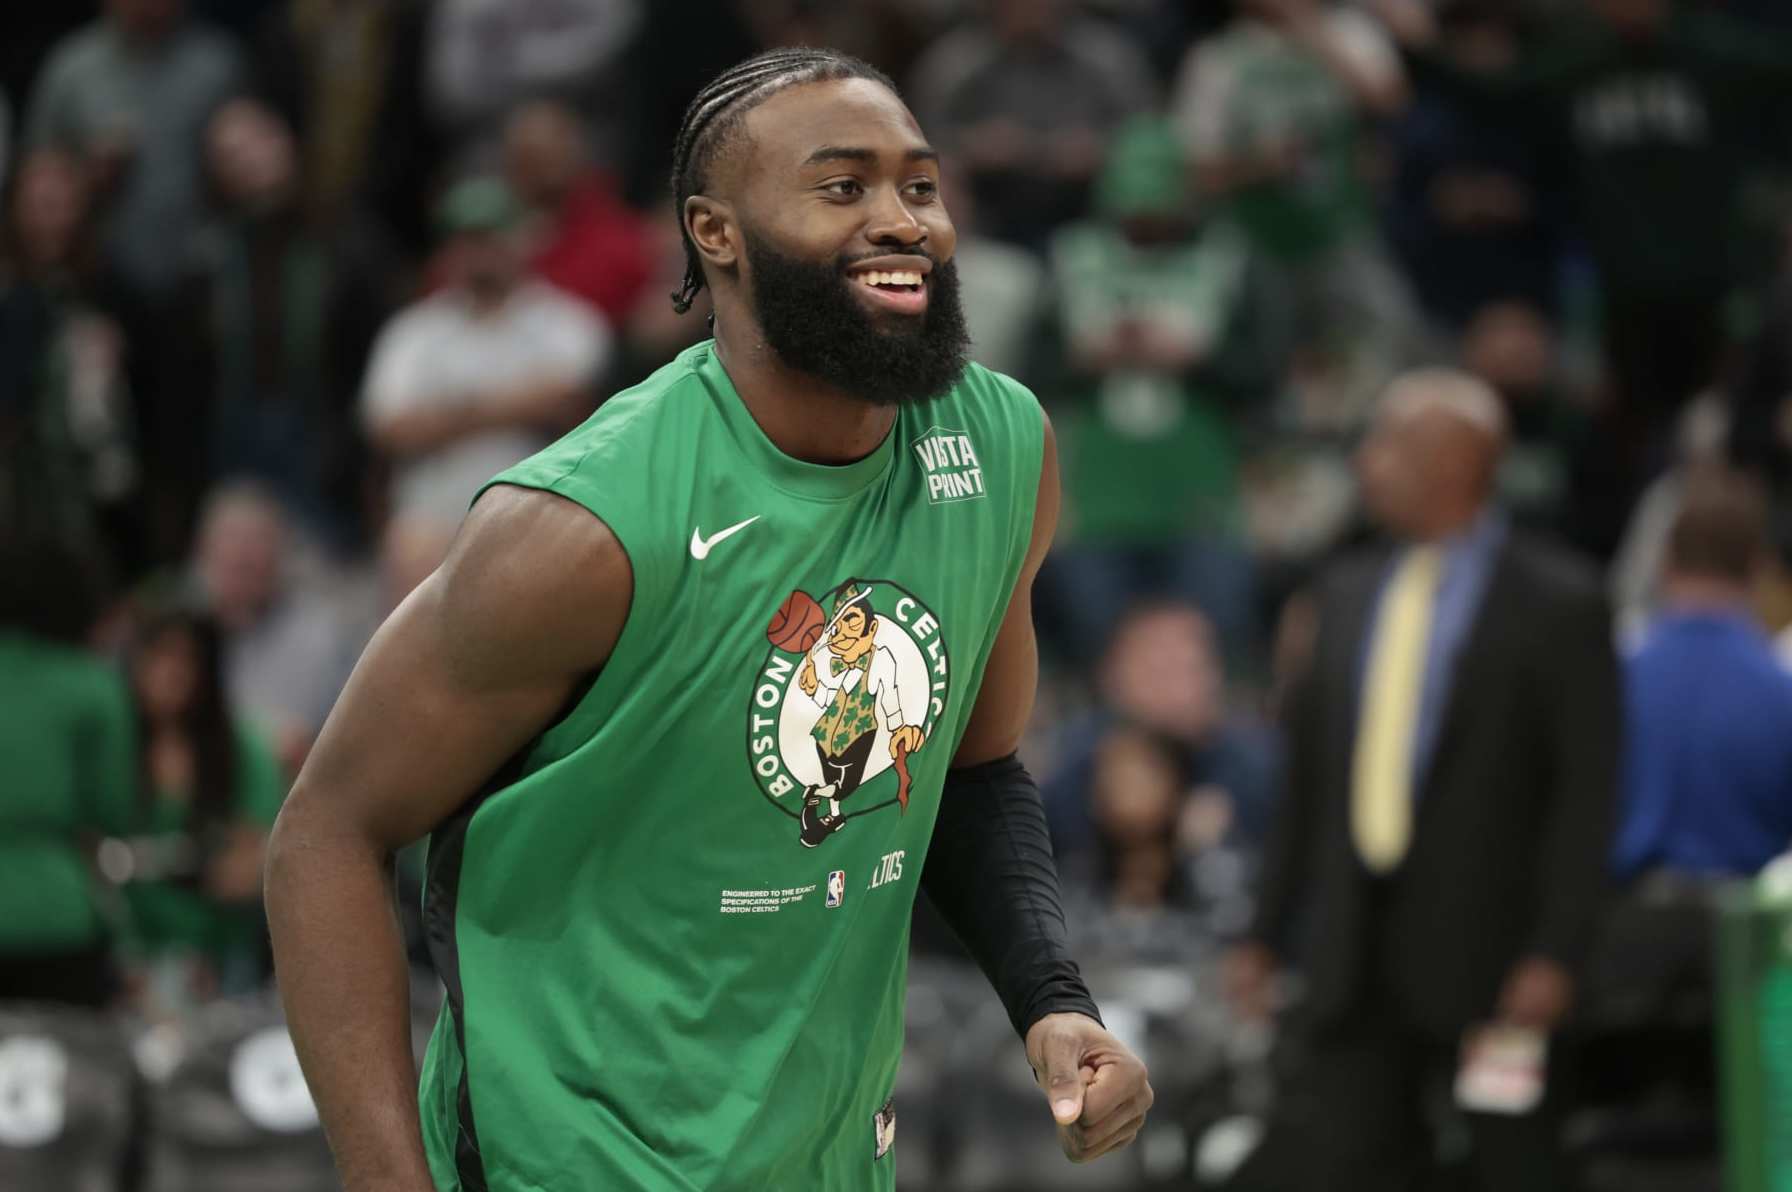 Here's where Jayson Tatum and Jaylen Brown rank in NBA jersey sales